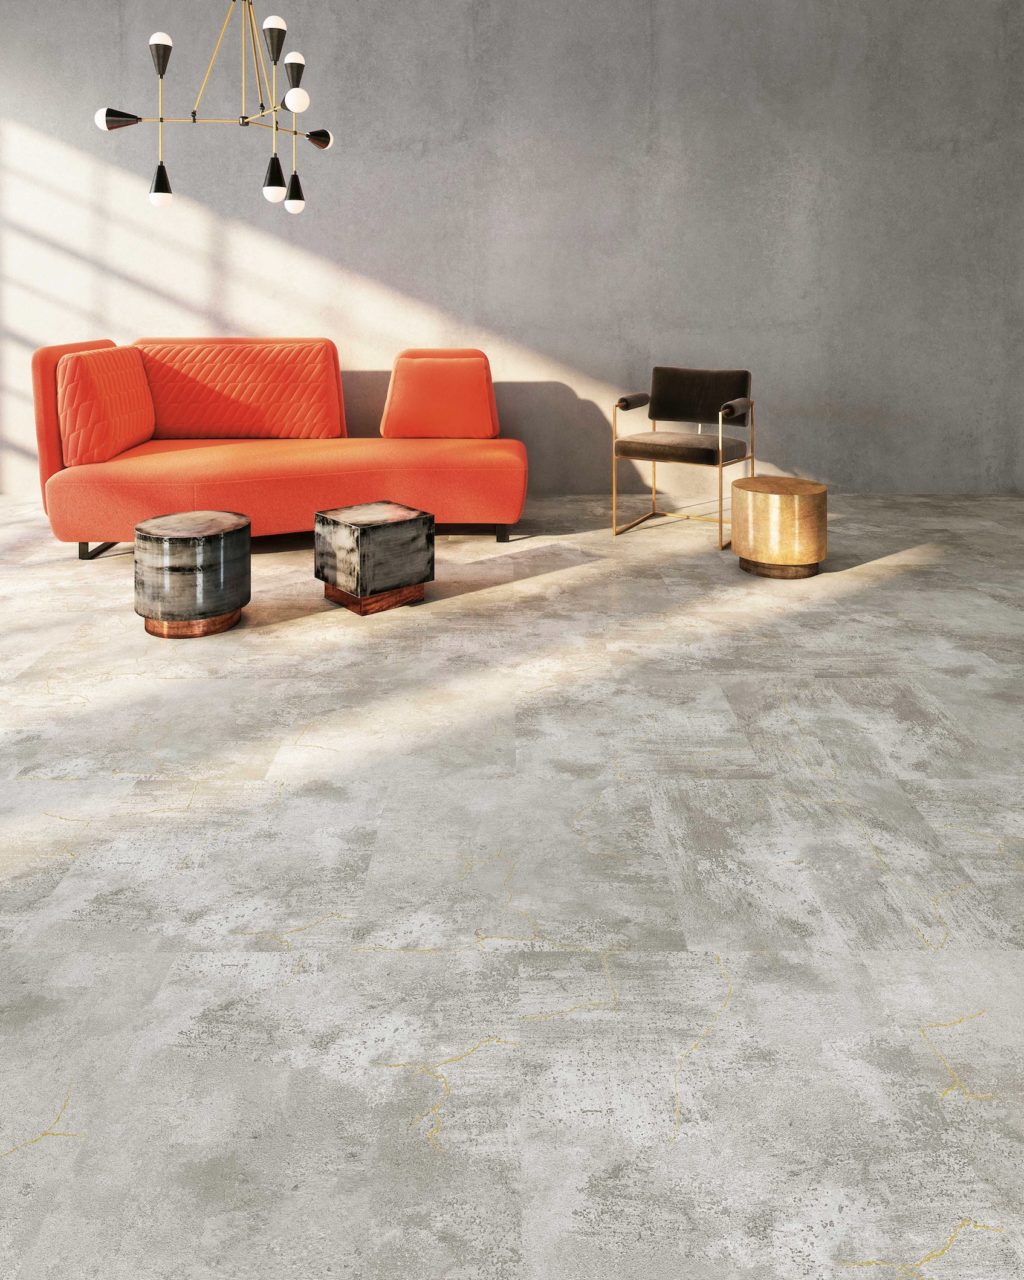 Patcraft launches Metal Collective resilient tile